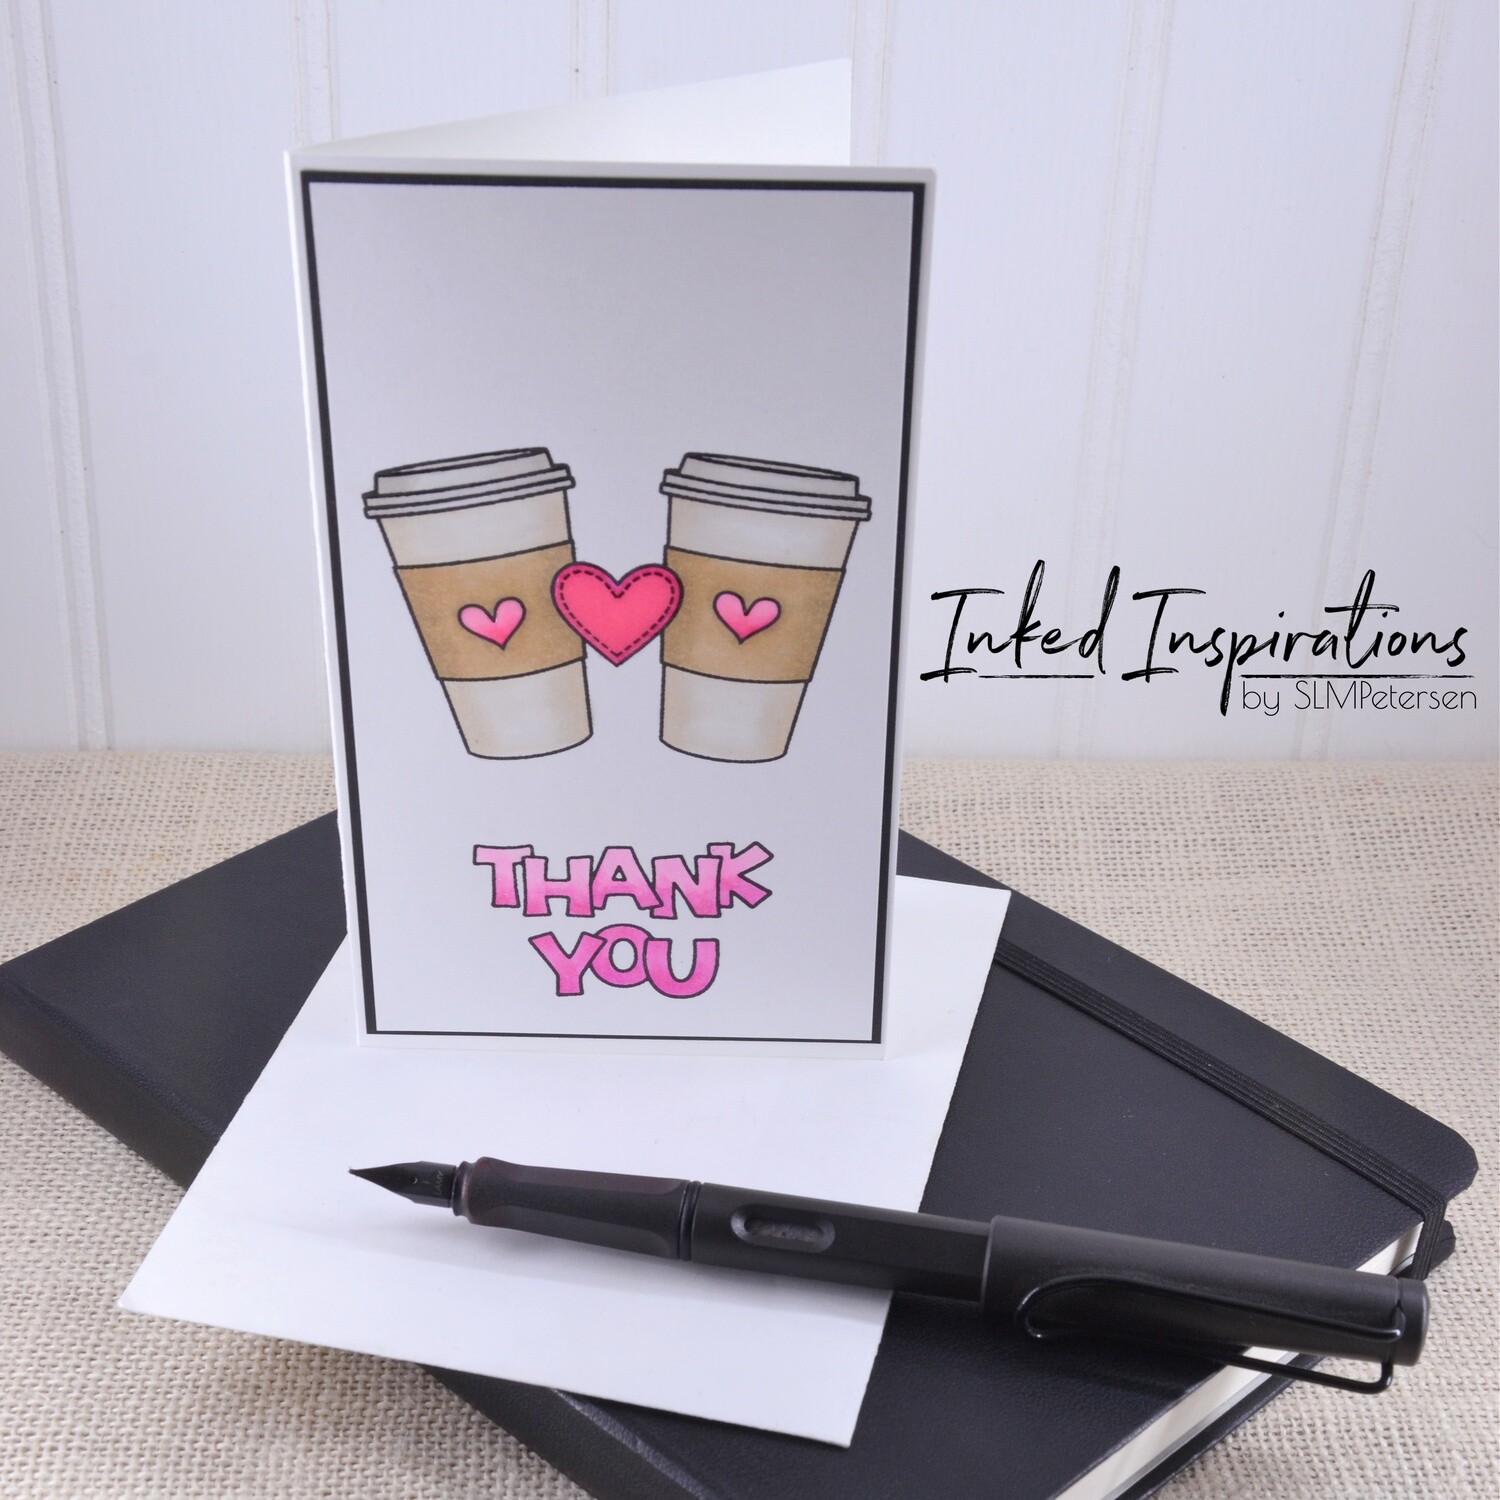 Thank You - Coffee Cups & Hearts in Pink